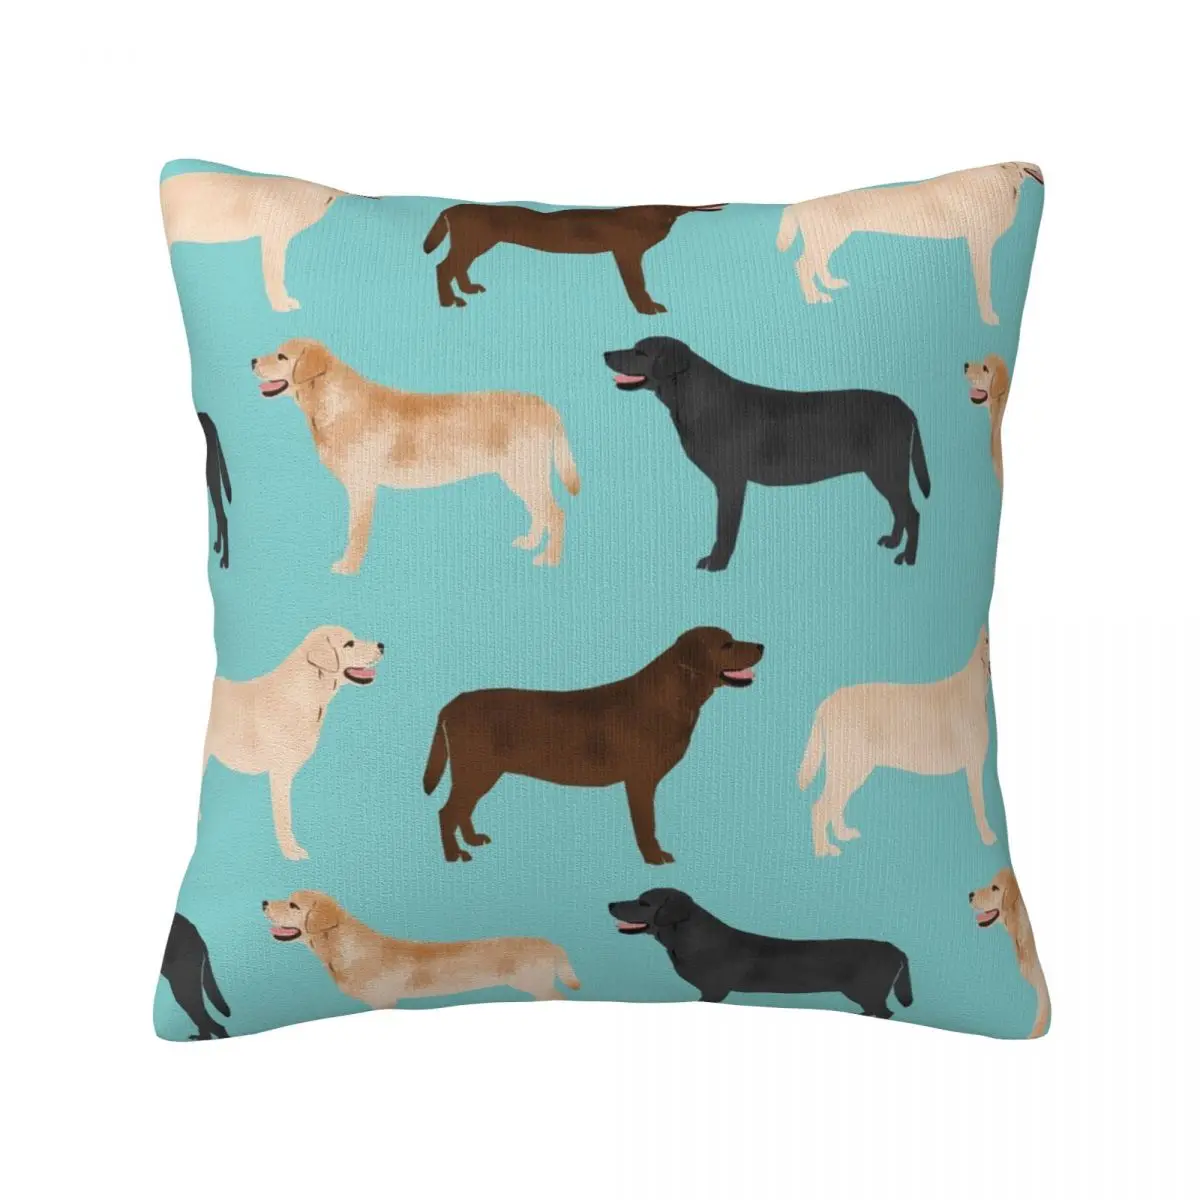 

Pet Dogs Pattern Throw Pillow Cover Decorative Pillow Covers Home Pillows Shells Cushion Cover Zippered Pillowcase